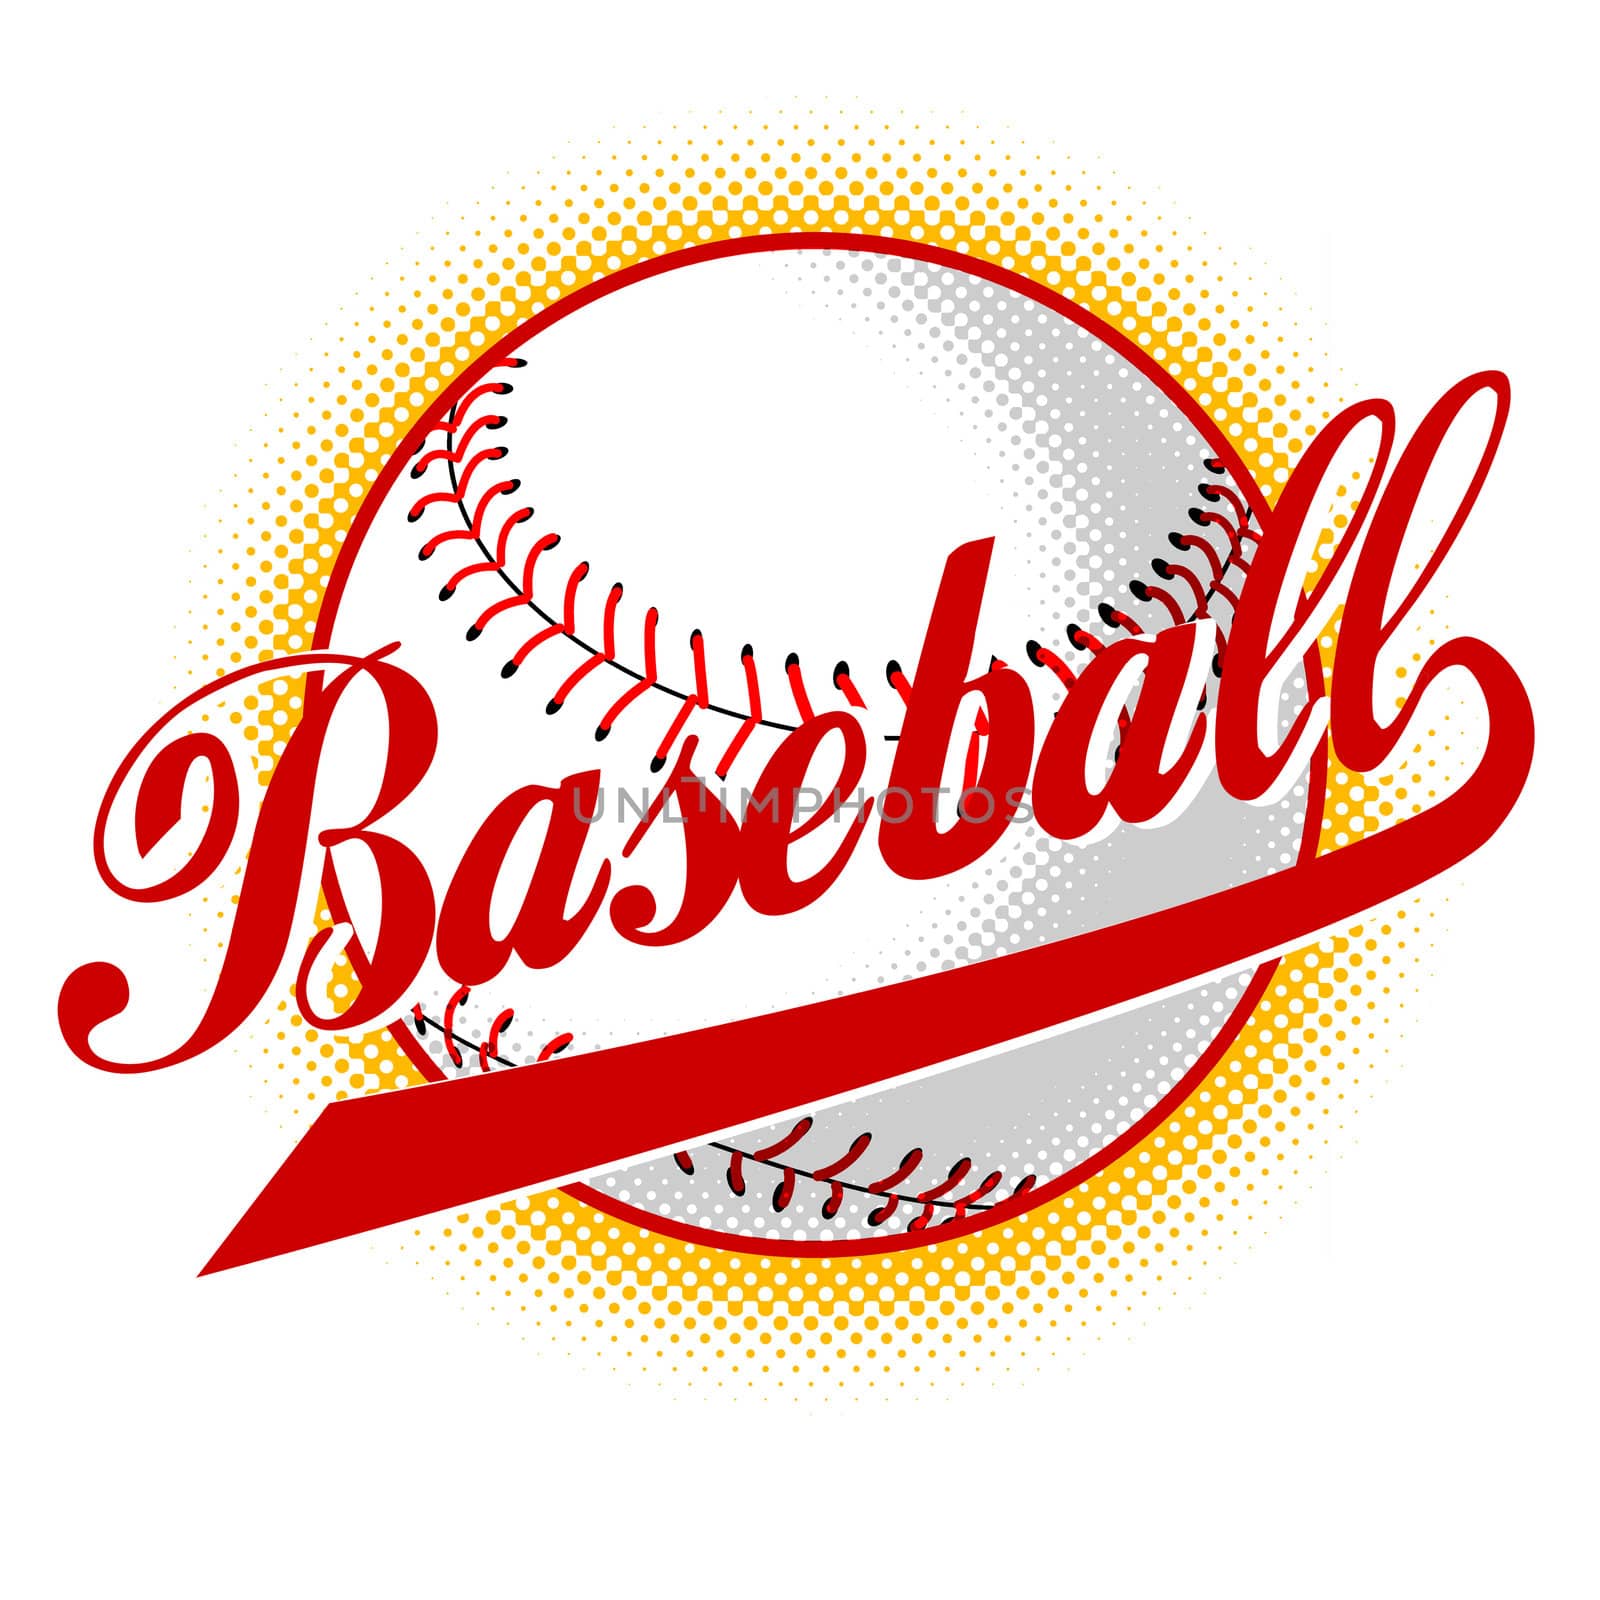 Illustration of a baseball ball with halftone dots in background on isolated background with words baseball